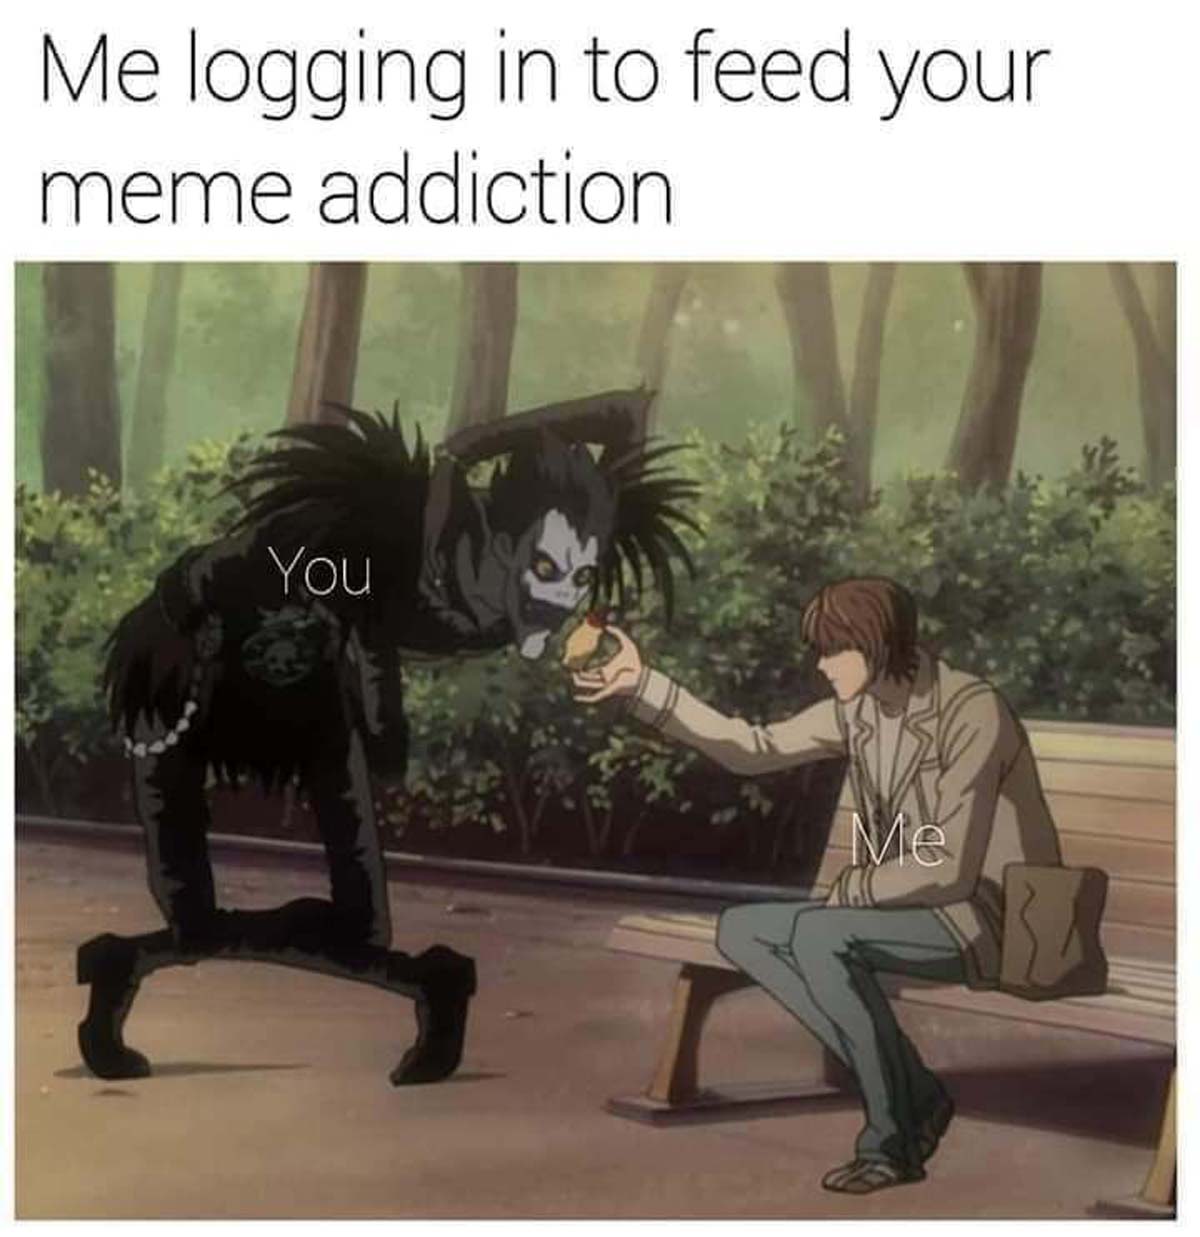 ryuk giving apple to light - Me logging in to feed your meme addiction You Me